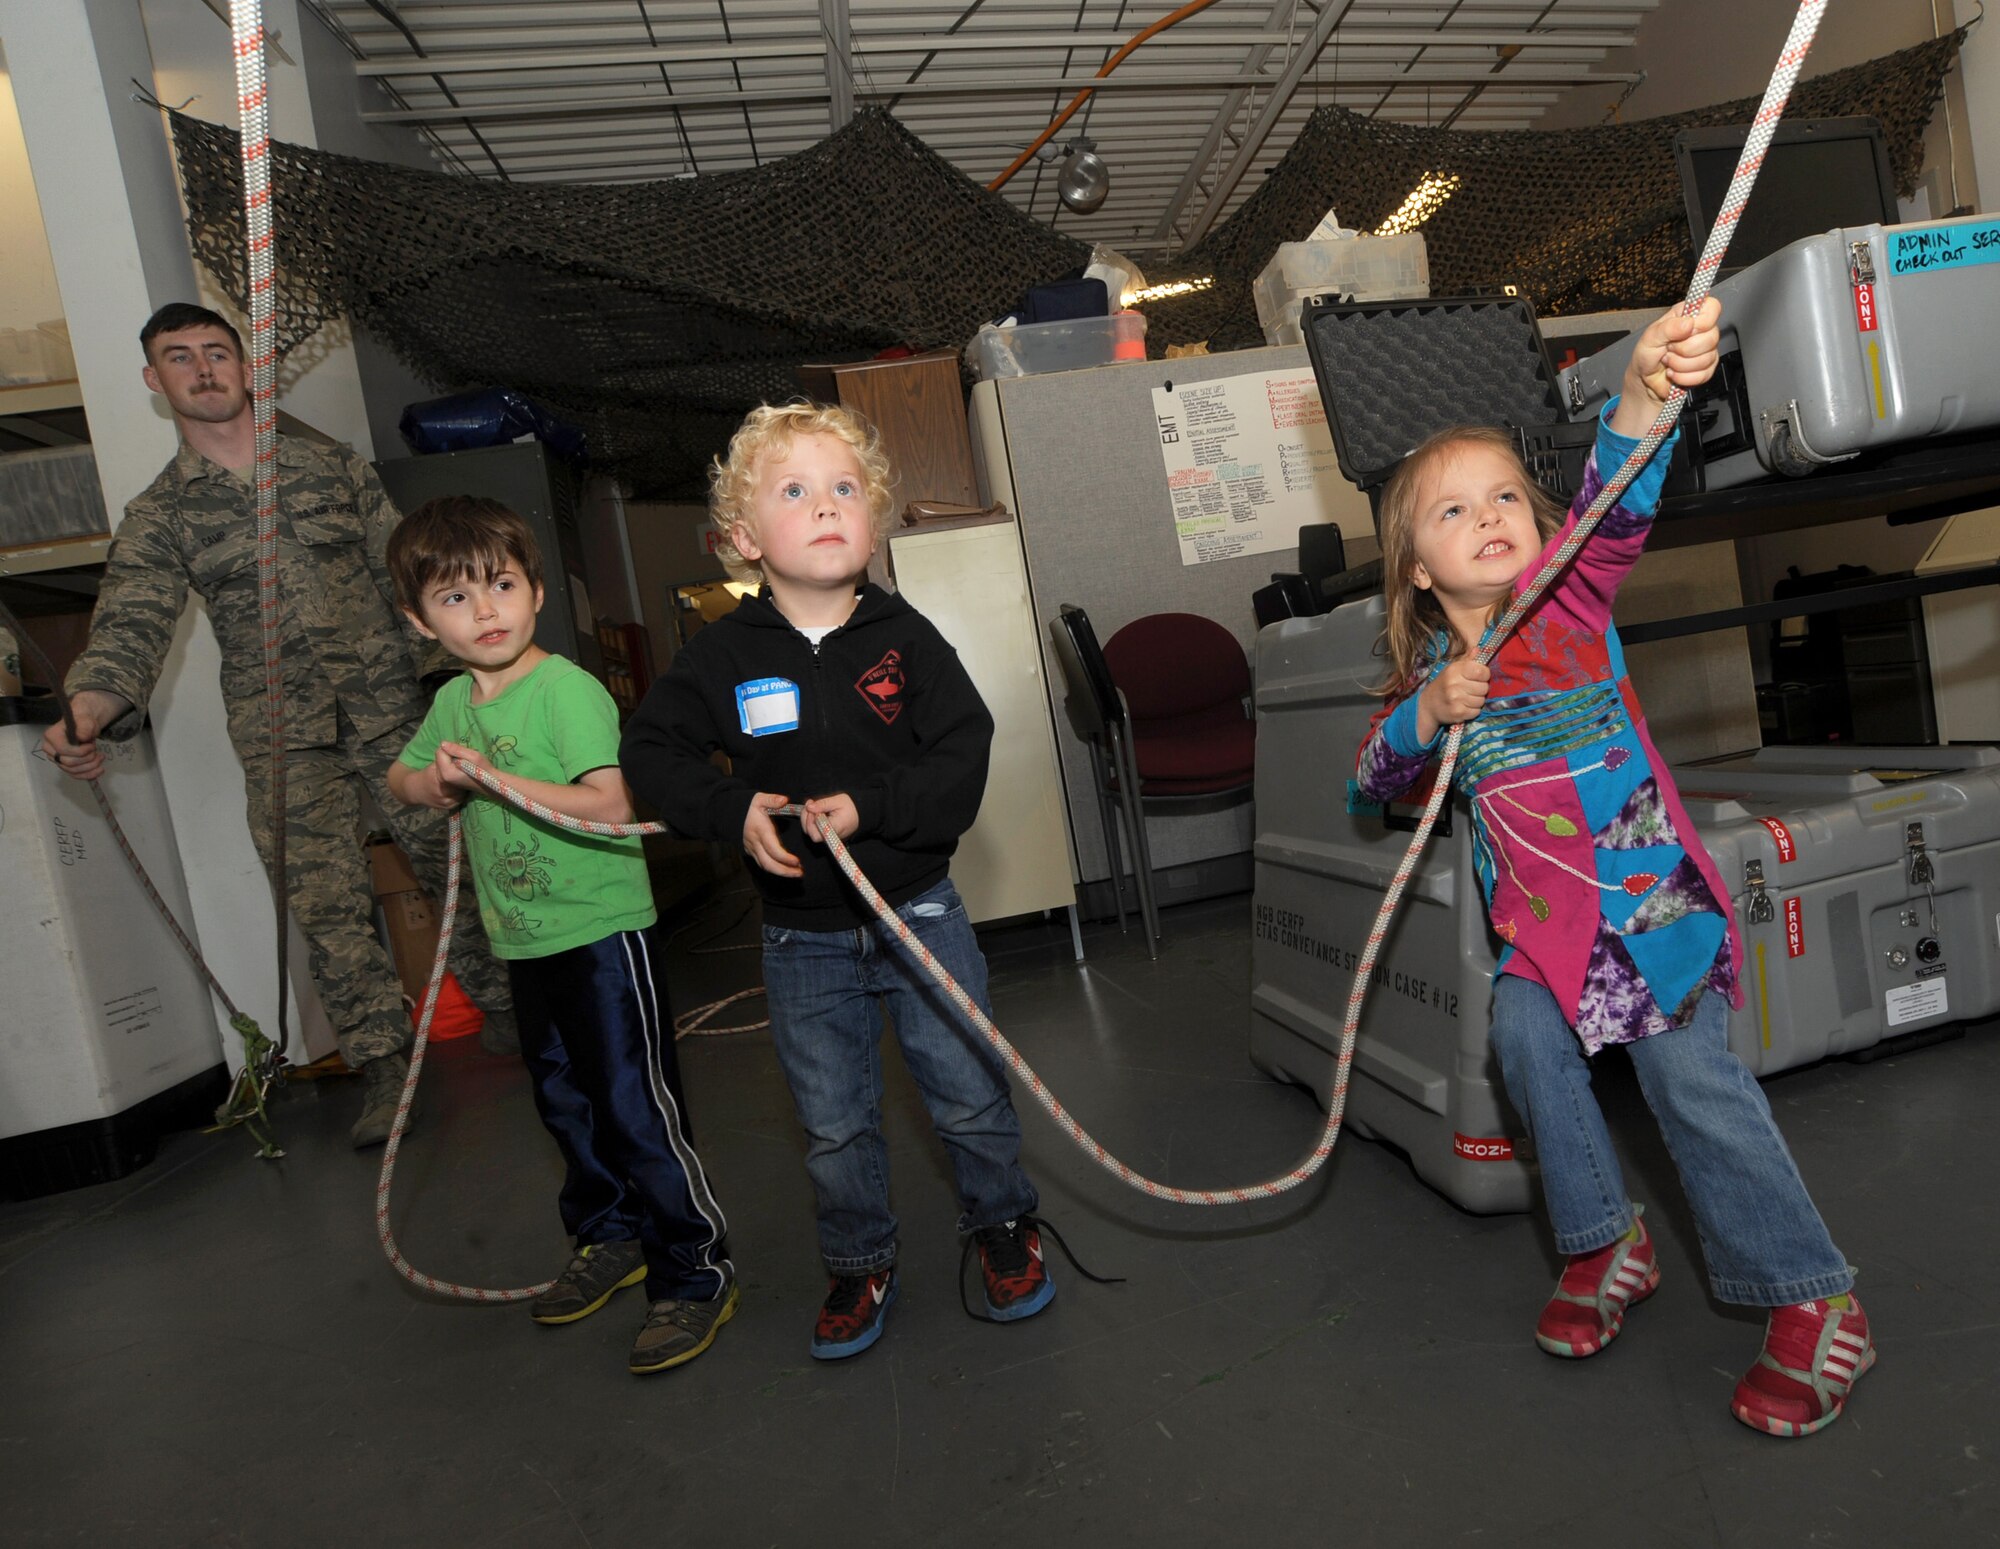 A group of kids use a pulley system to help lift others in rescue gear while attending ‘Kids Day at PANG’ April 25, 2015, personnel at the Portland Air National Guard Base, Ore.  The Oregon National Guard opened the Portland Air Base to children of military members for a special day of activities highlighting “The Month of the Military Child,” designated since 1986 by the Department of Defense as way to recognize the contribution and personal sacrifices children make to the military. (U.S. Air National Guard photo by Tech. Sgt. John Hughel, 142nd Fighter Wing Public Affairs/Released)